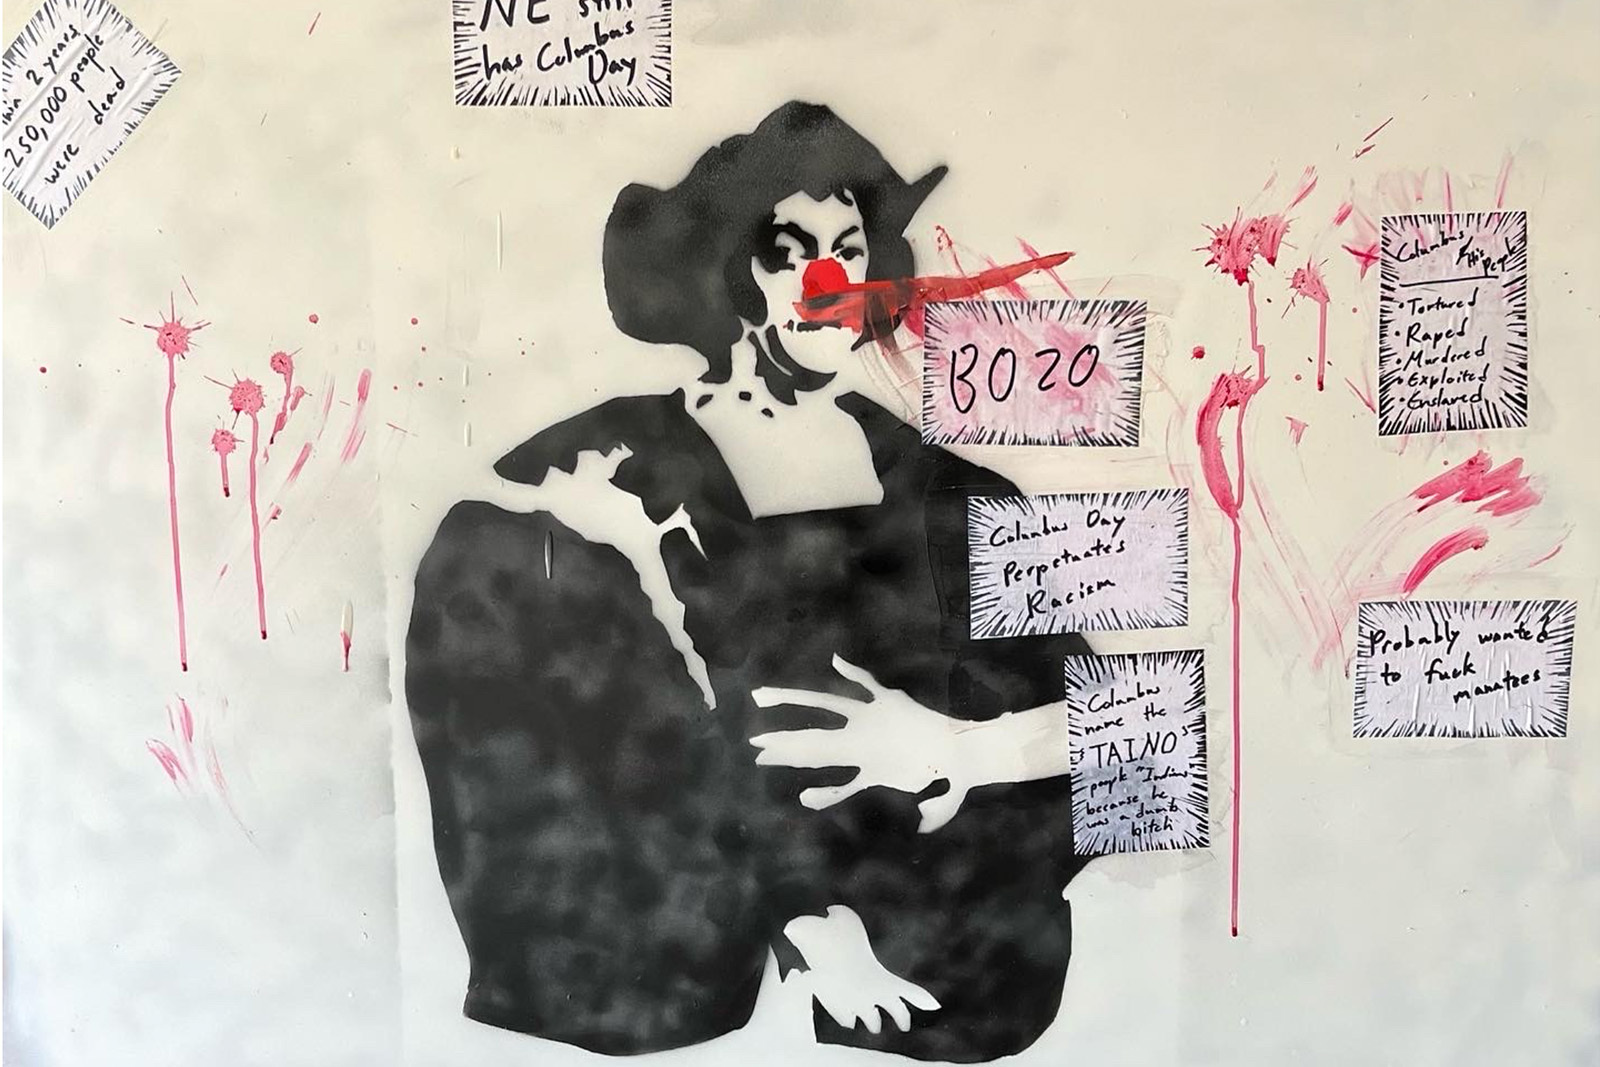 A black and white stencil of christopher columbus with a red clown nose with small wheat pasted messages around it